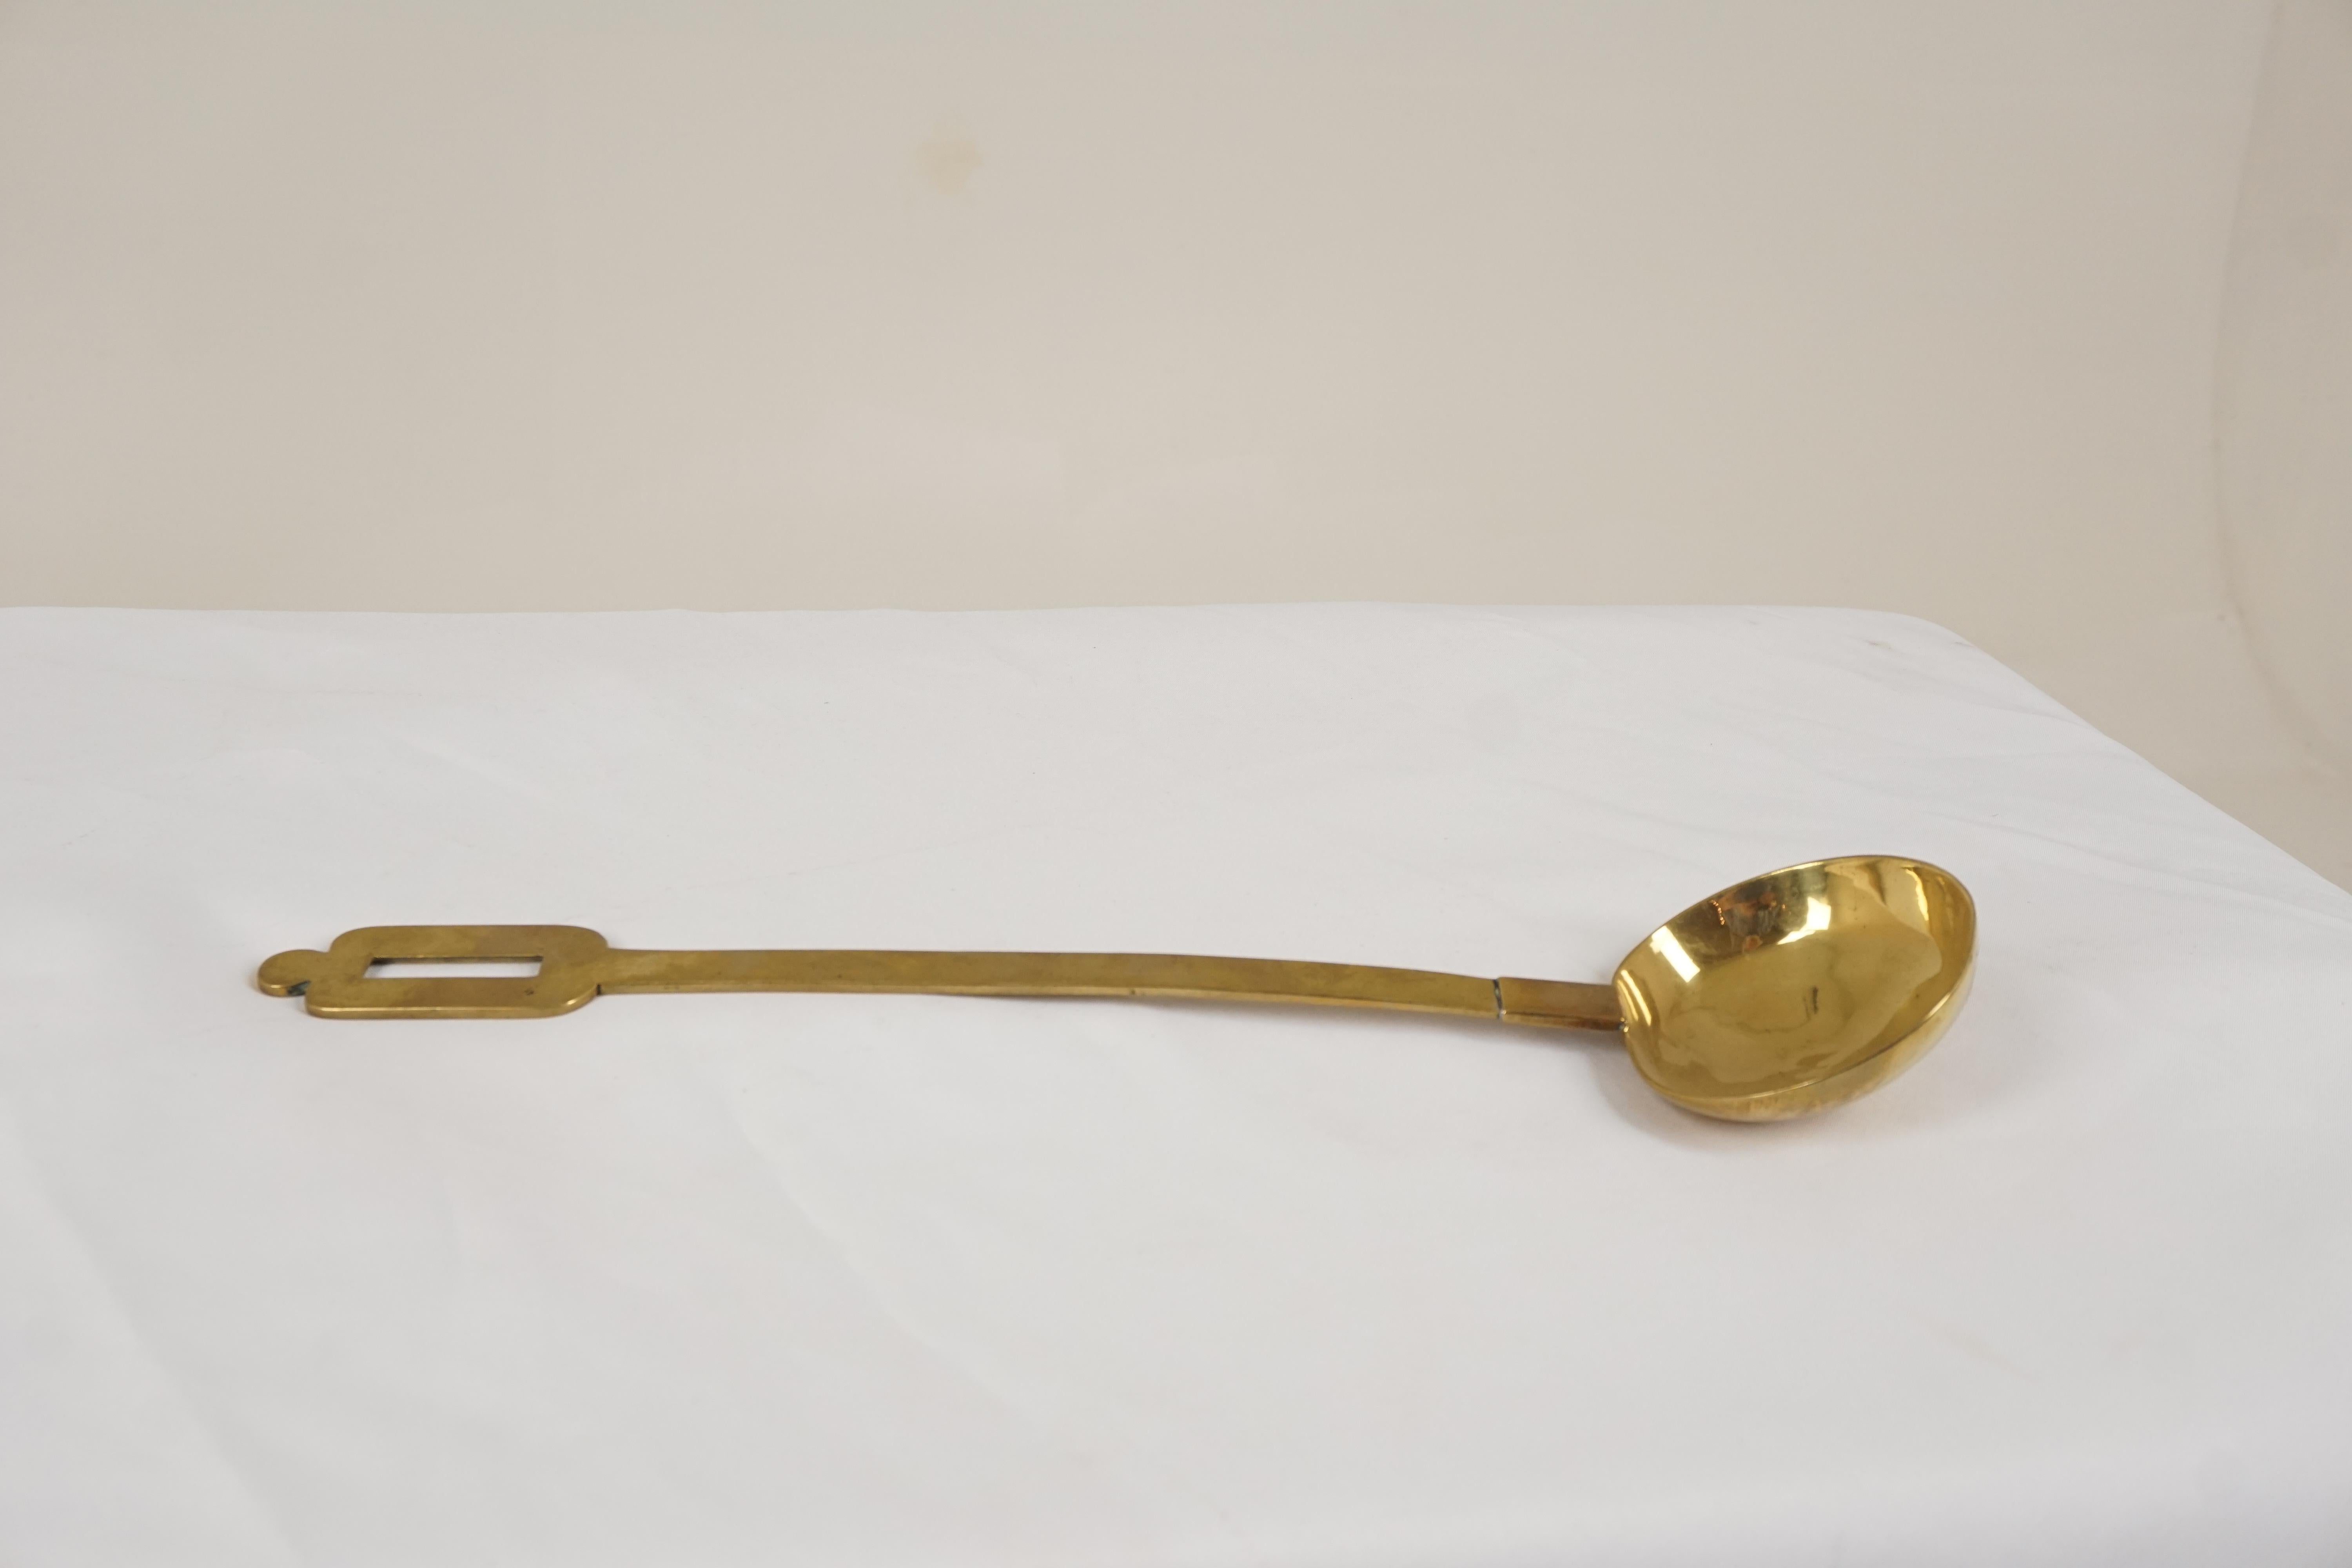 Antique brass ladle, Victorian, country house kitchen, Scotland 1880, B78y

Scotland 1880
Victorian brass country house kitchen ladle
Constructed in heavy gauge sheet brass and copper rivets
With nicely pierced 